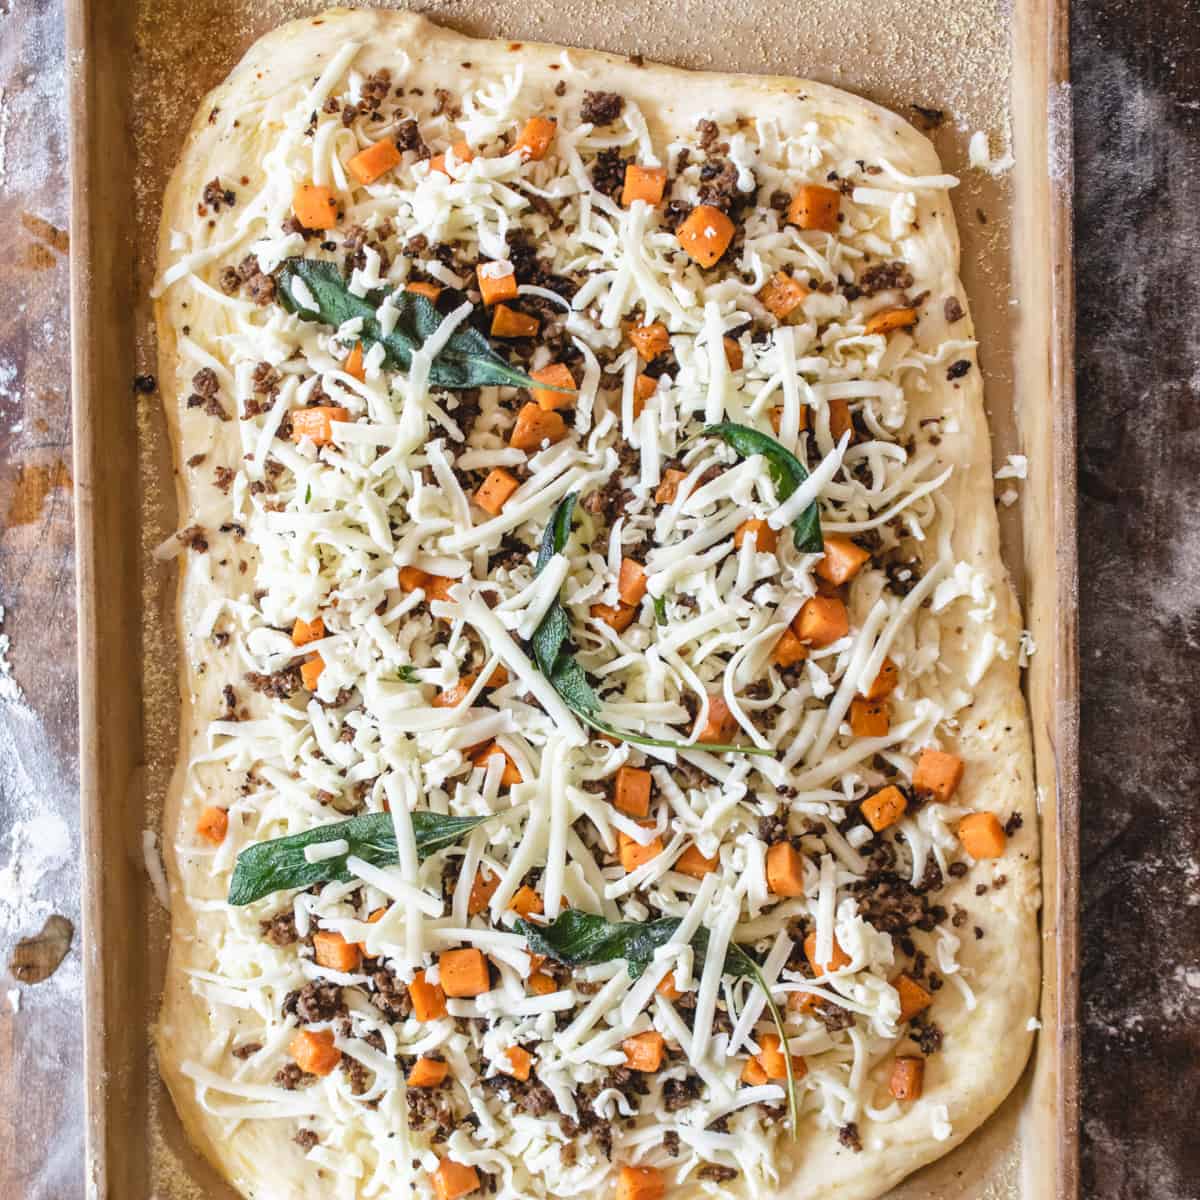 Uncooked pizza with Fall vegetables, cheese and herbs